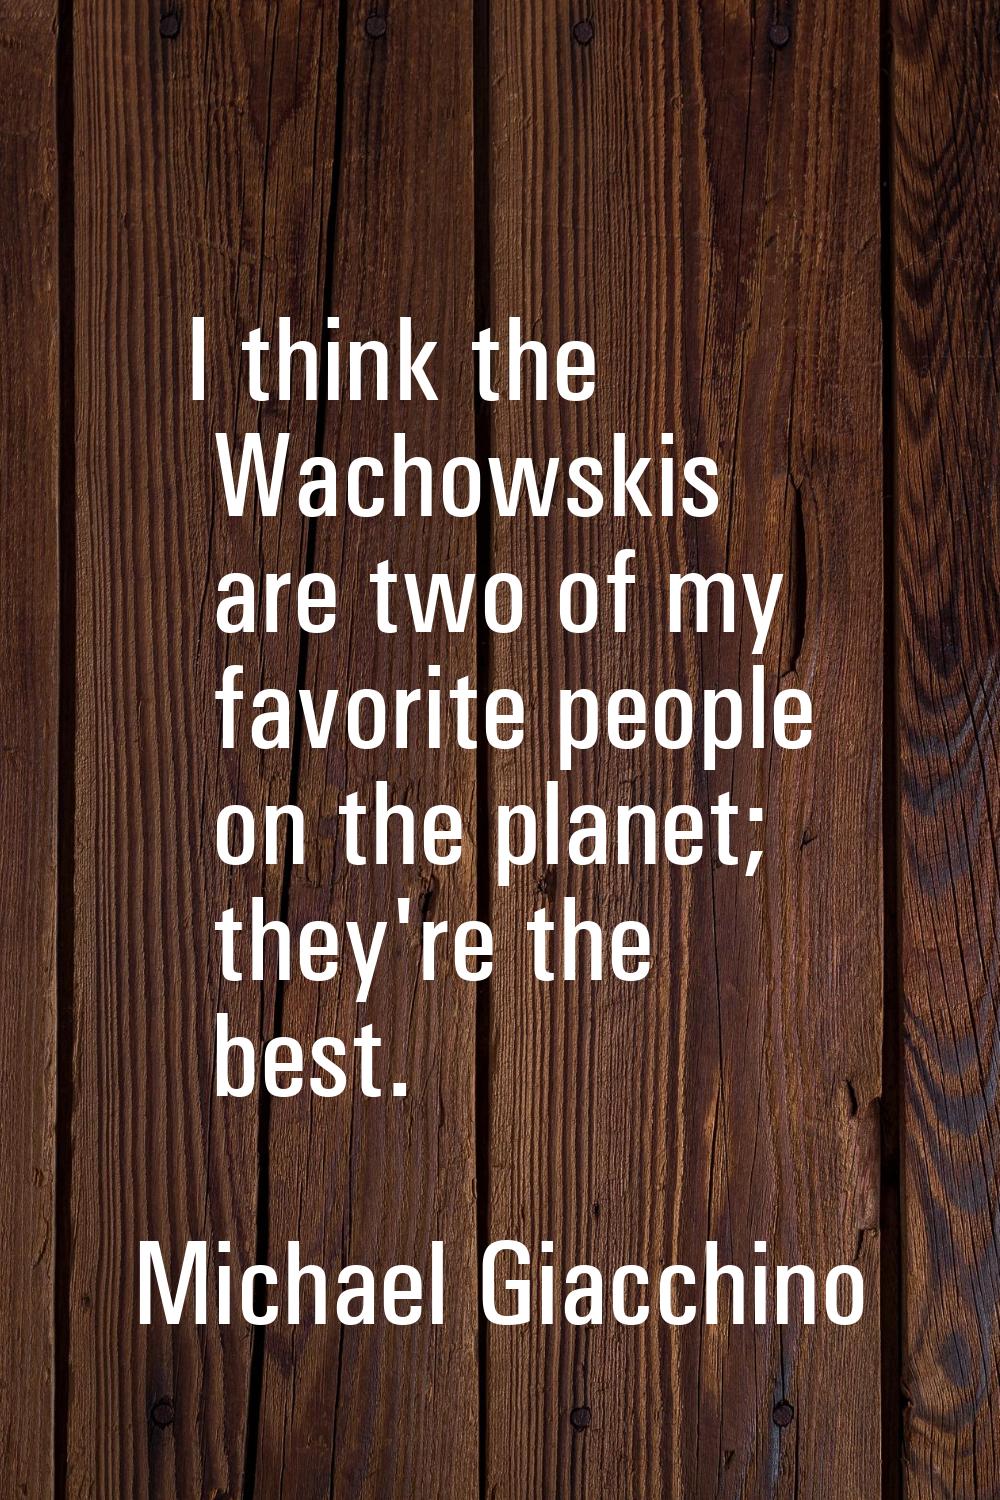 I think the Wachowskis are two of my favorite people on the planet; they're the best.